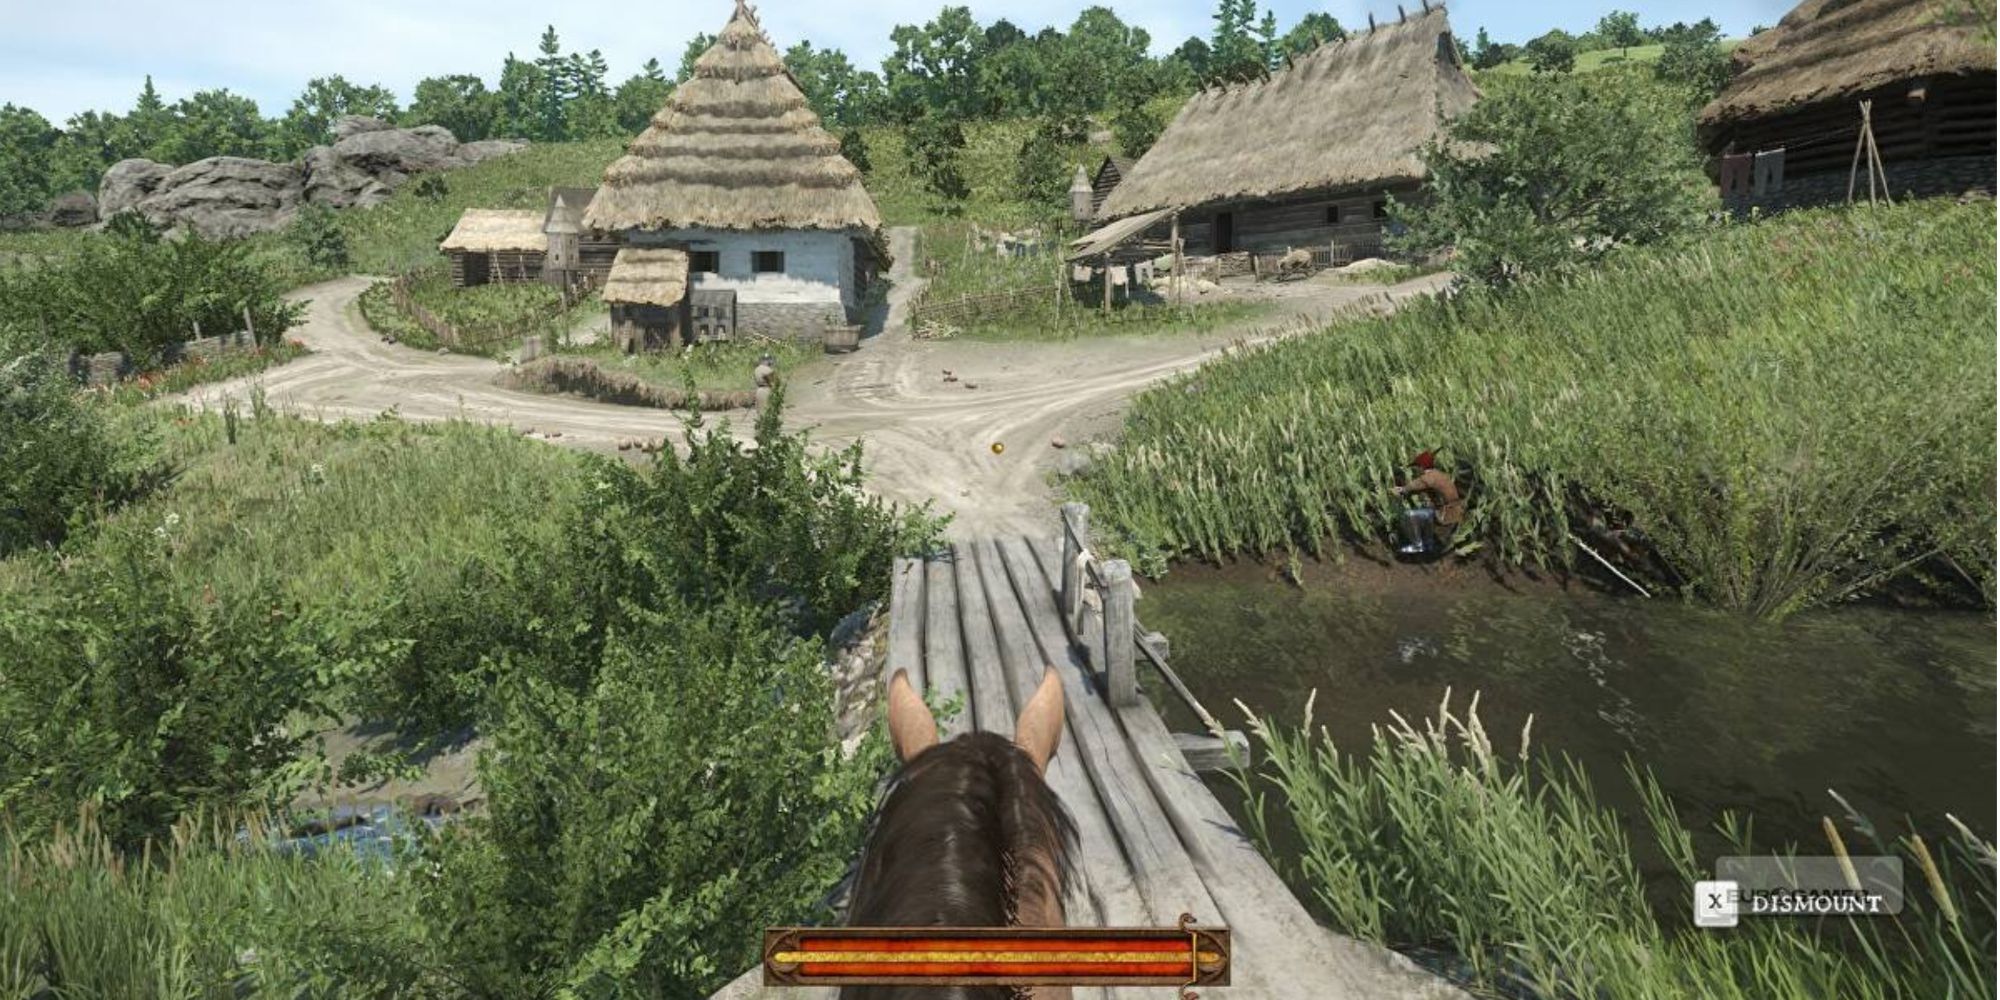 Kingdom Come Deliverance is very difficult, but so was surviving in Medieval Bohemia